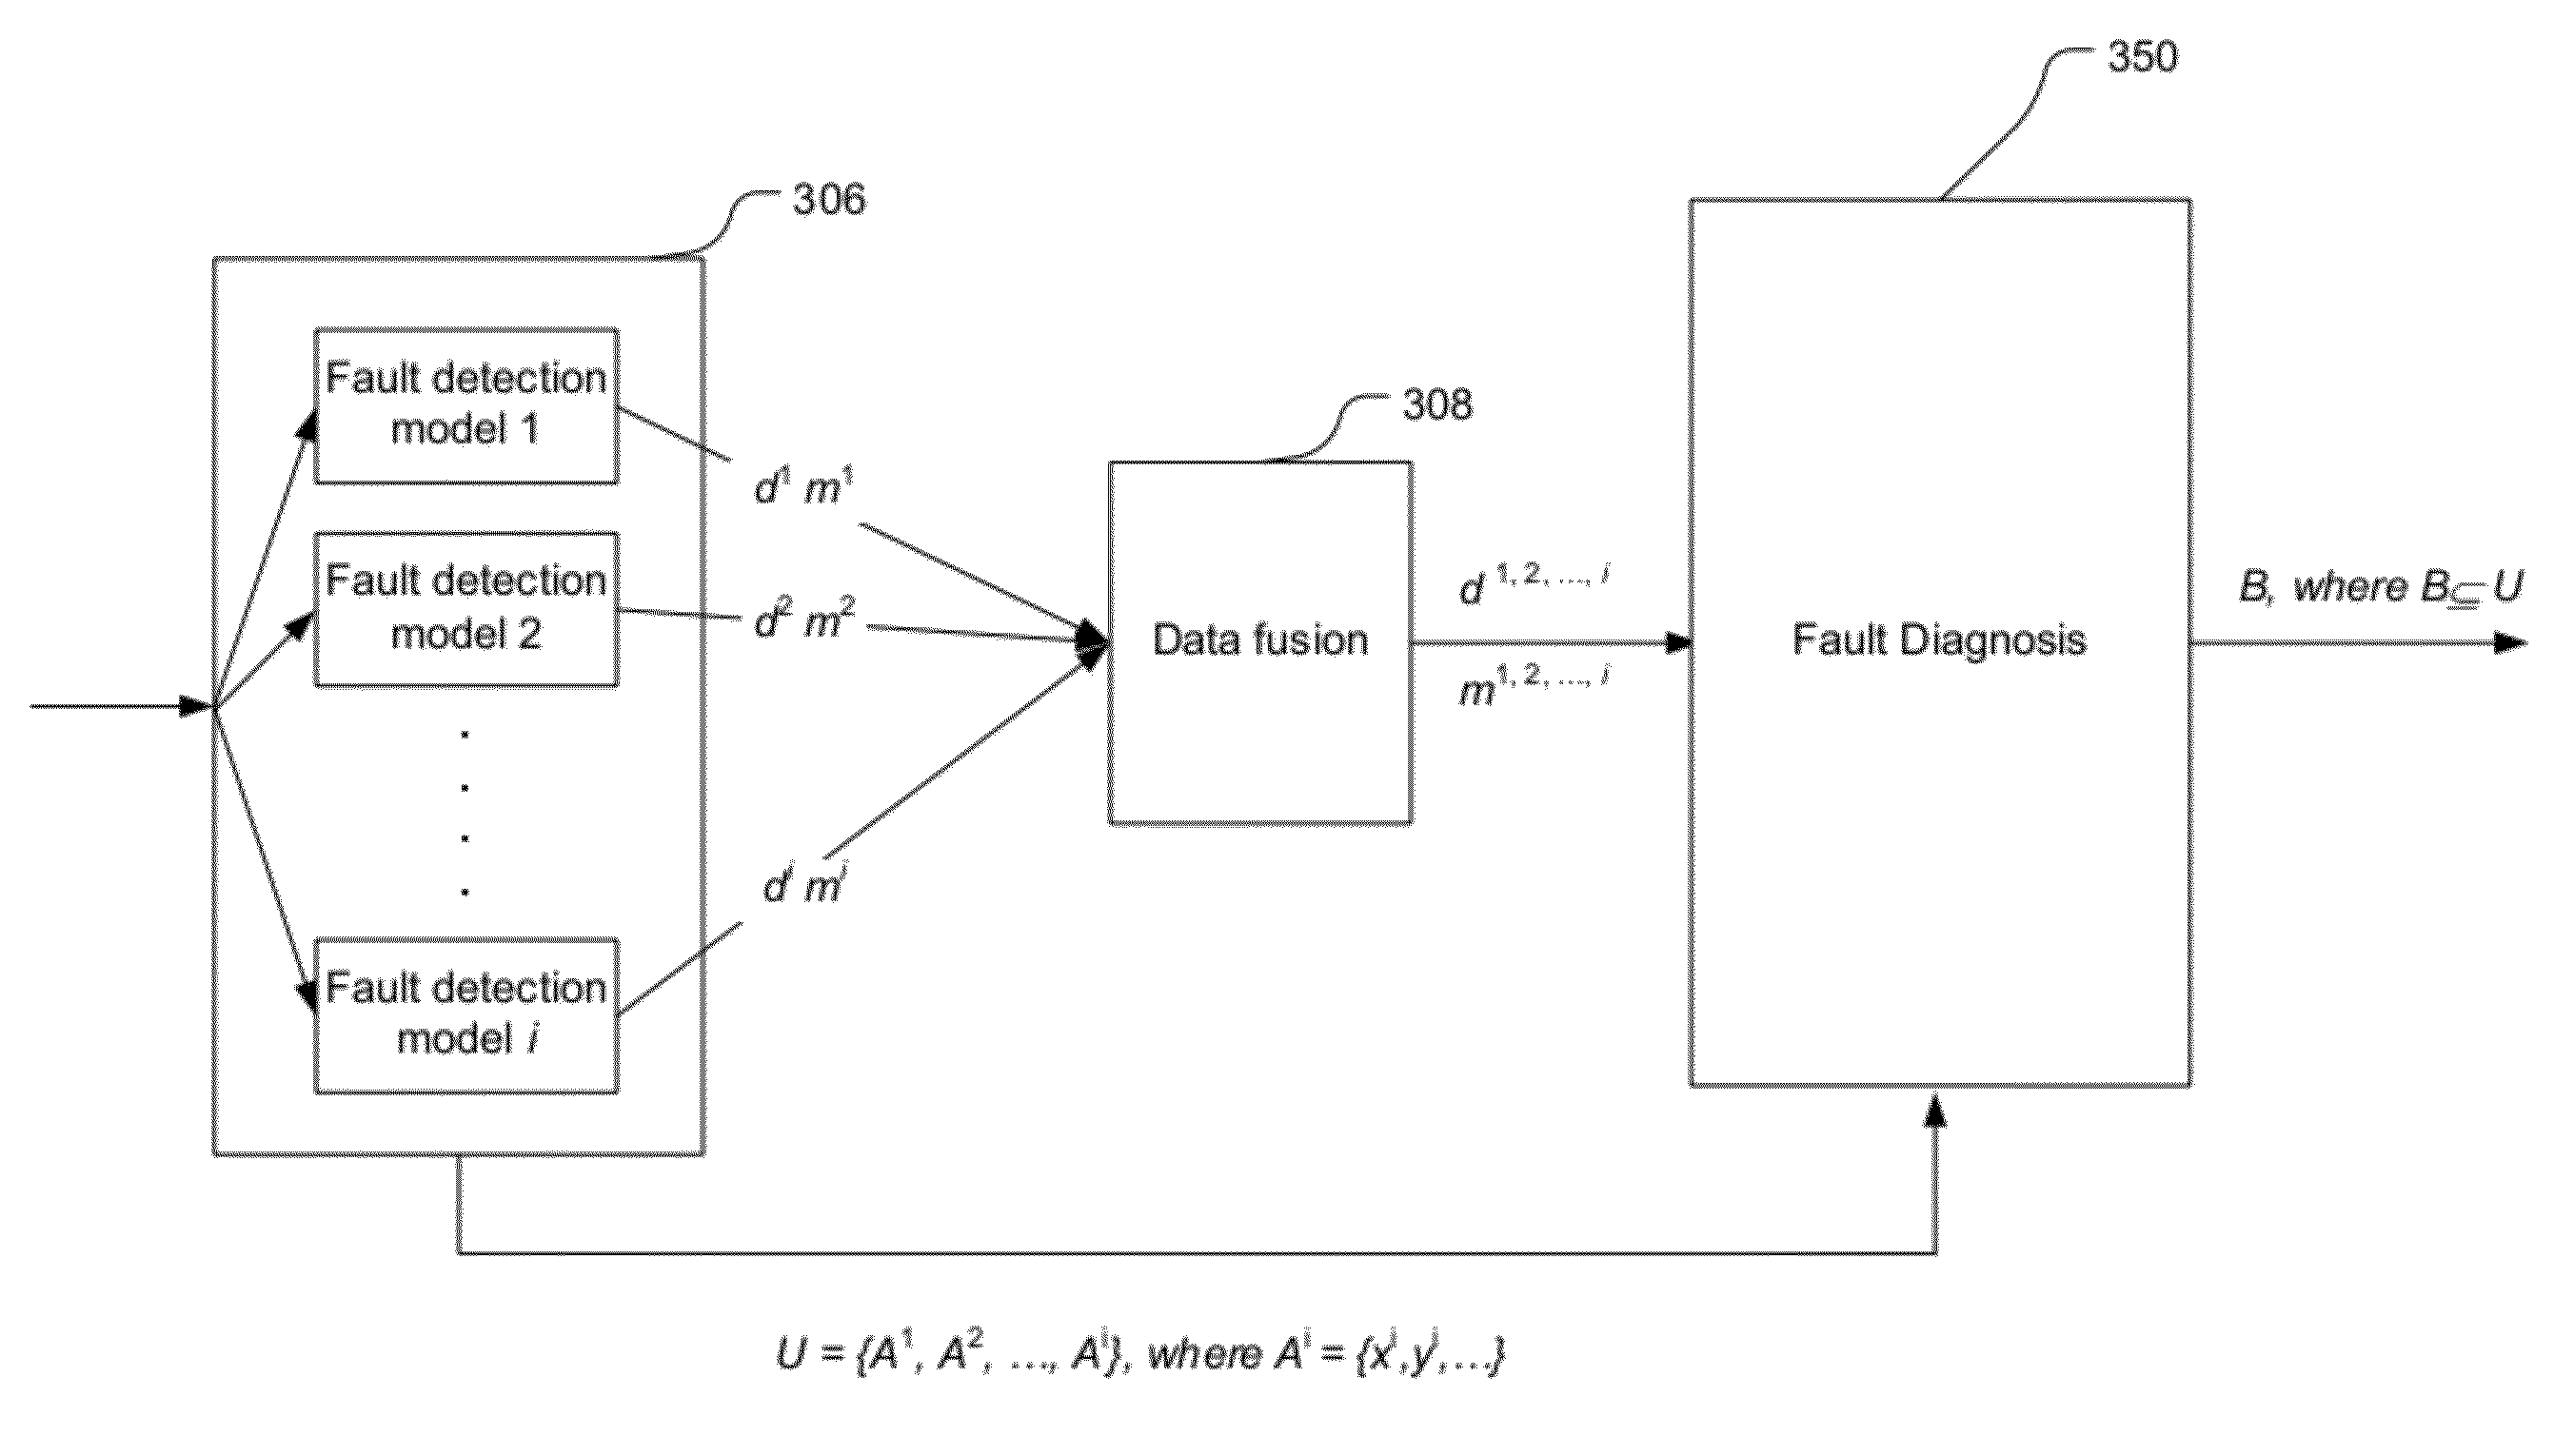 System and method for detecting and/or diagnosing faults in multi-variable systems